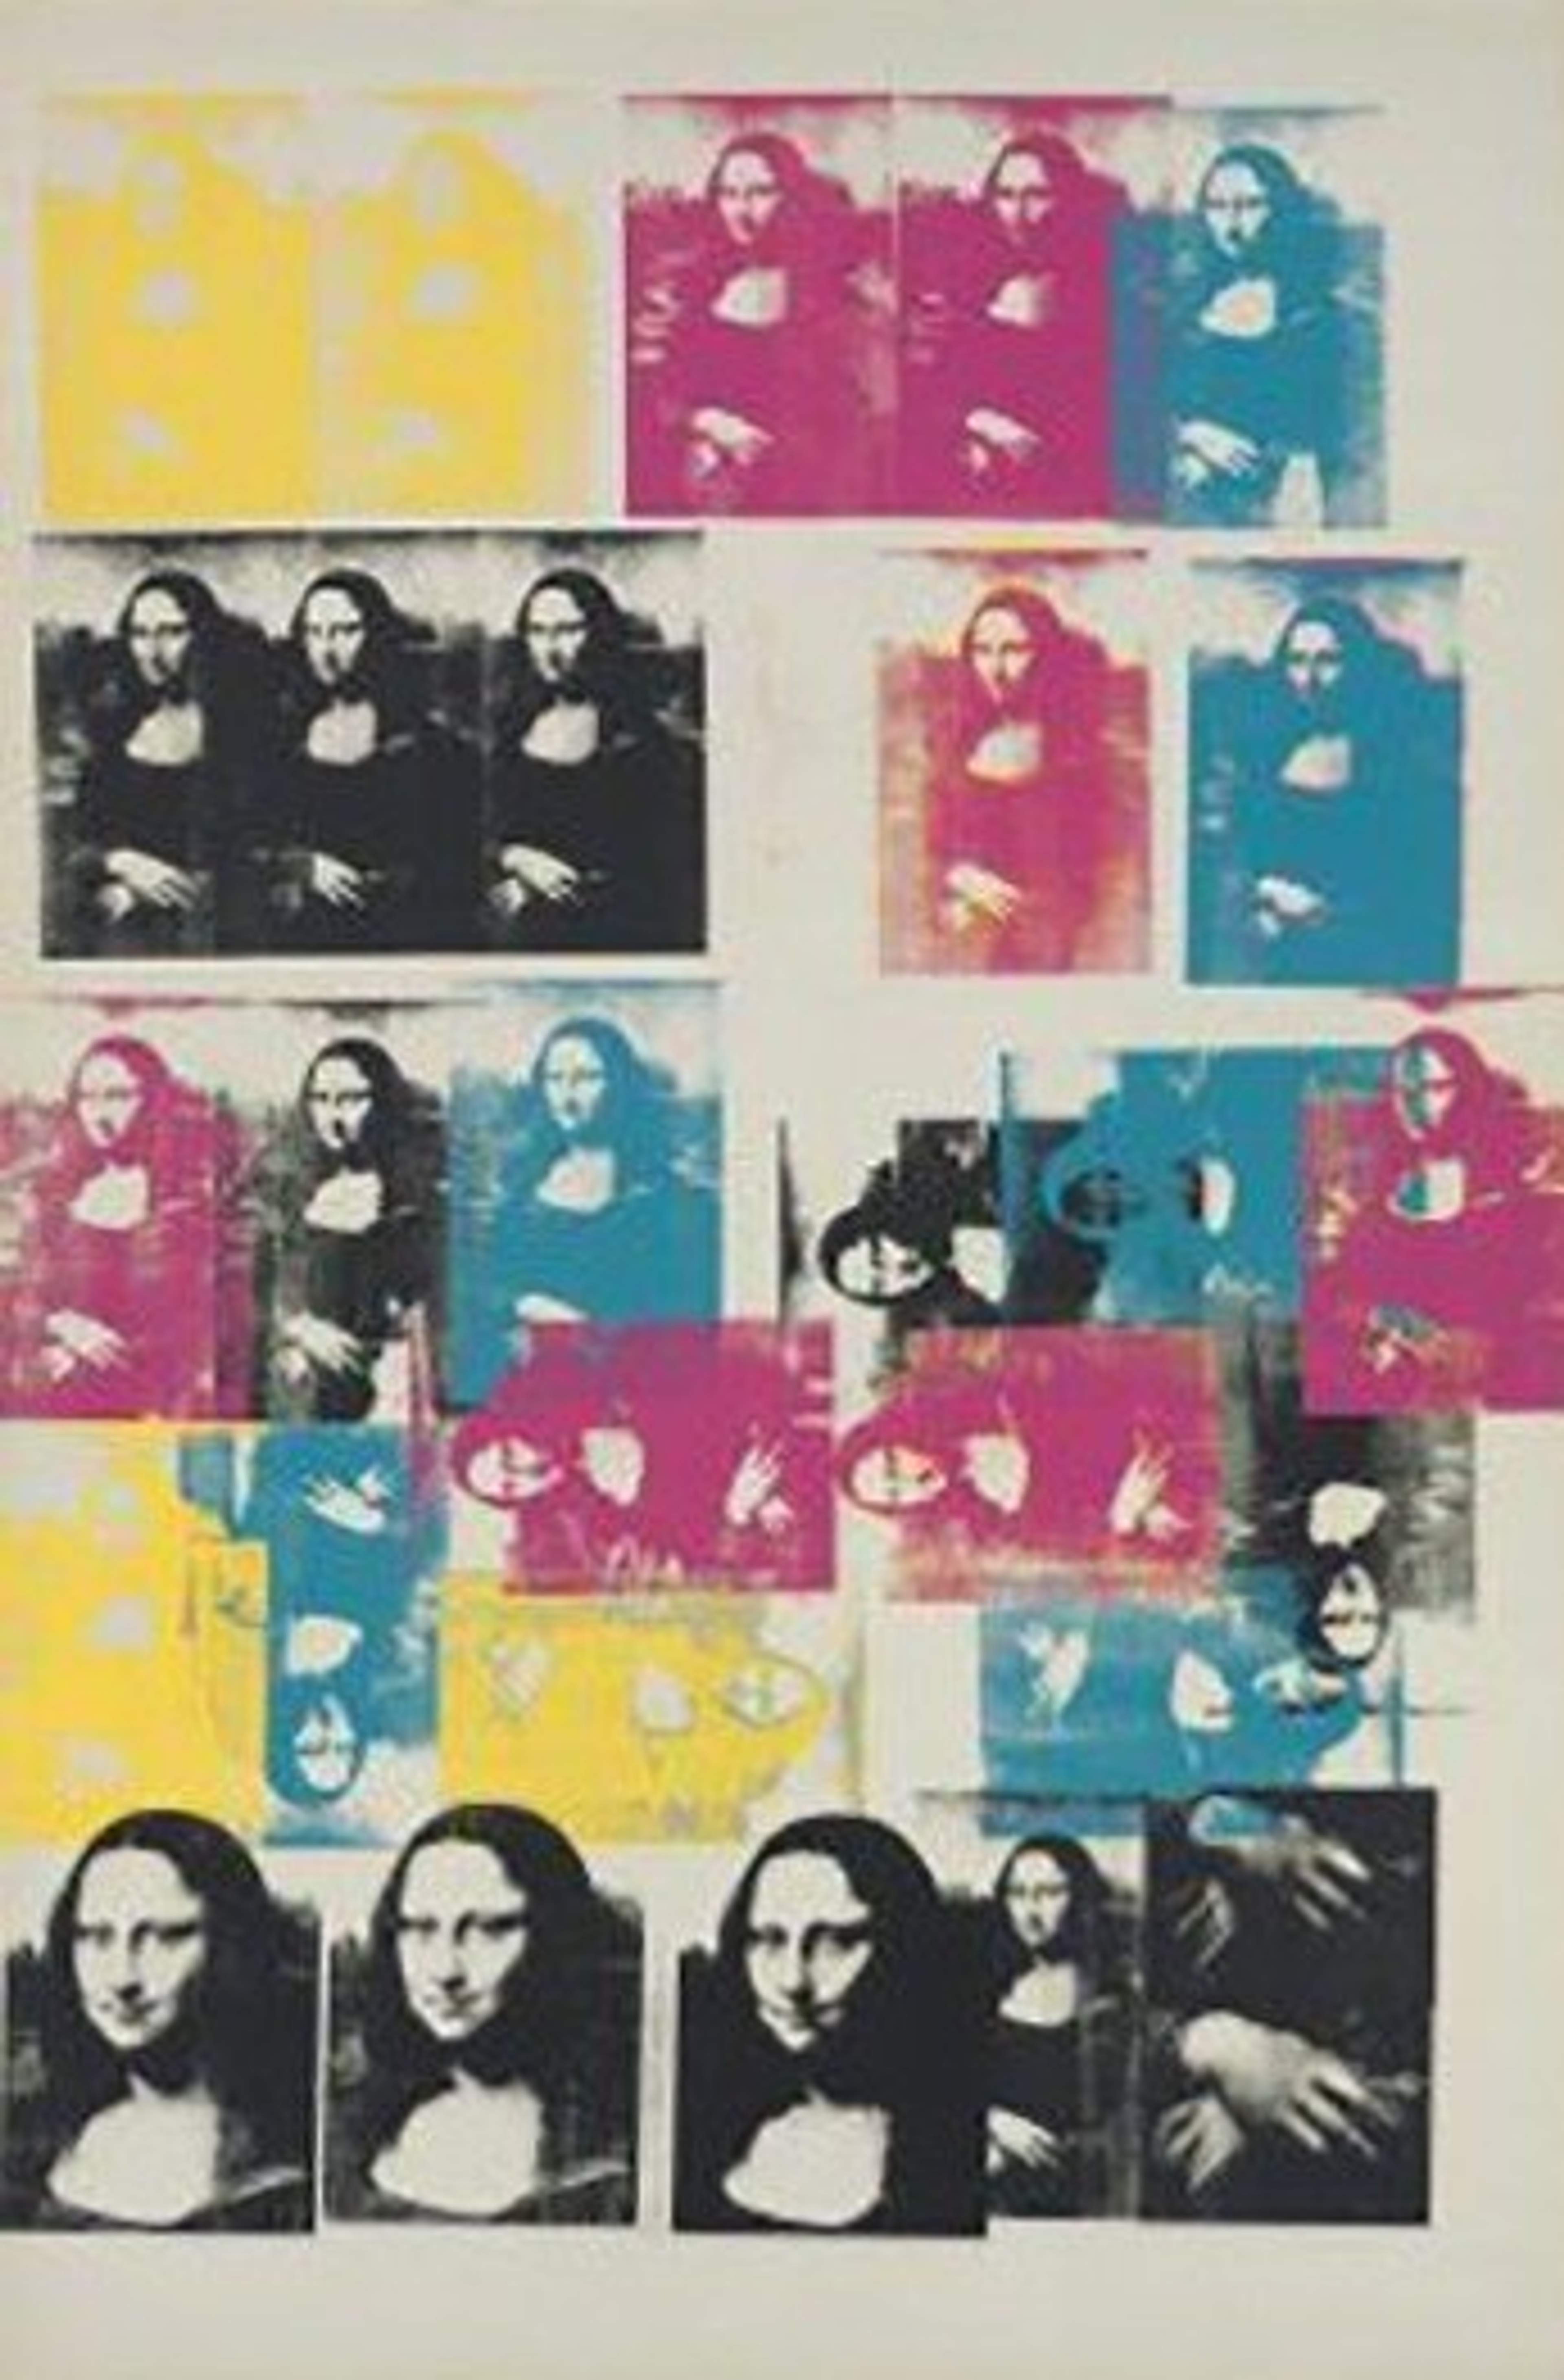 Colored Mona Lisa by Andy Warhol